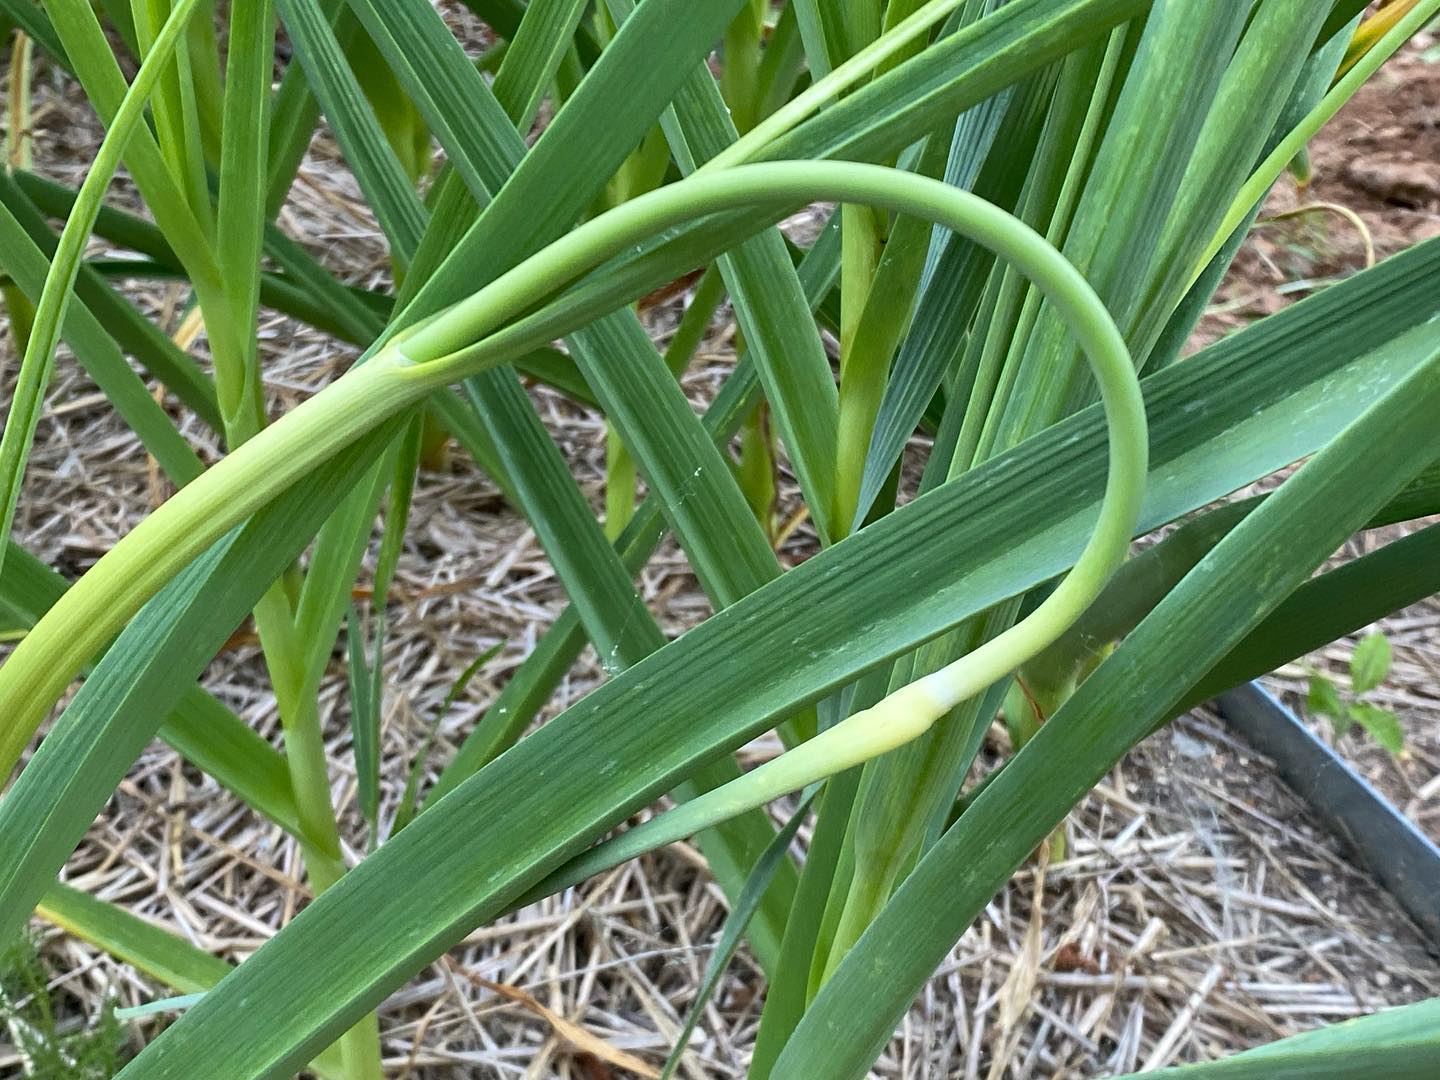 The “Great’Scape”! 🤣😆😂
Seriously though, these garlic scapes are amazing!!! This is from one of my many test beds.  Yup, going to be expanding the garlic plantings for sure! 🤤🤤🤤